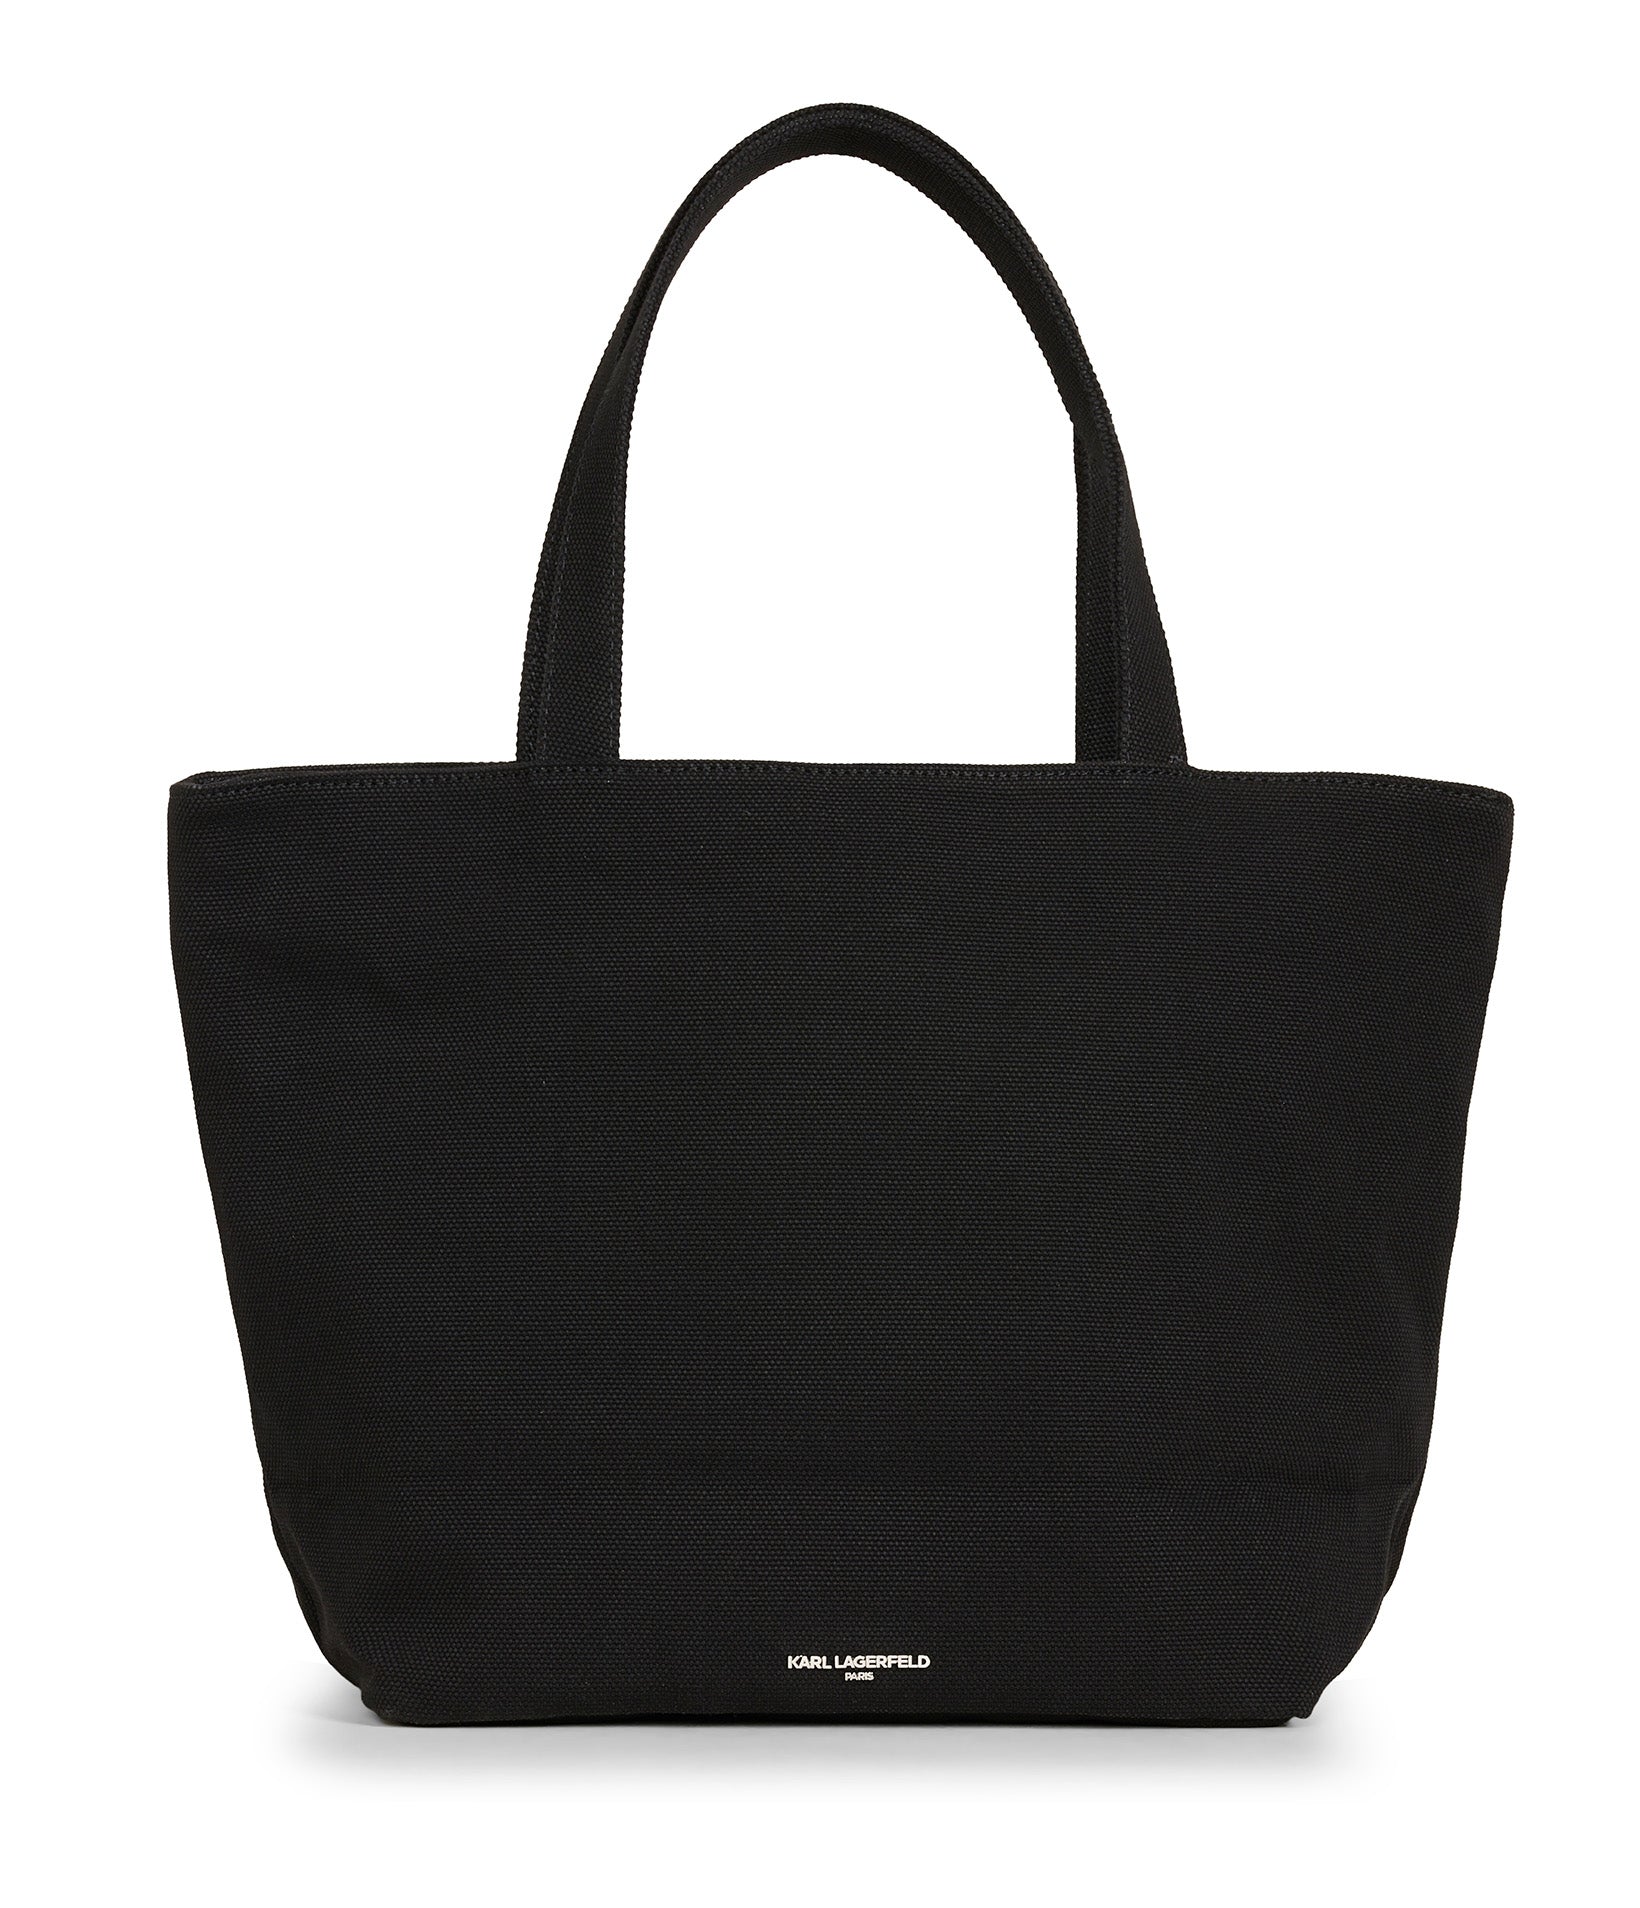 CANNES CANVAS KARL TOTE